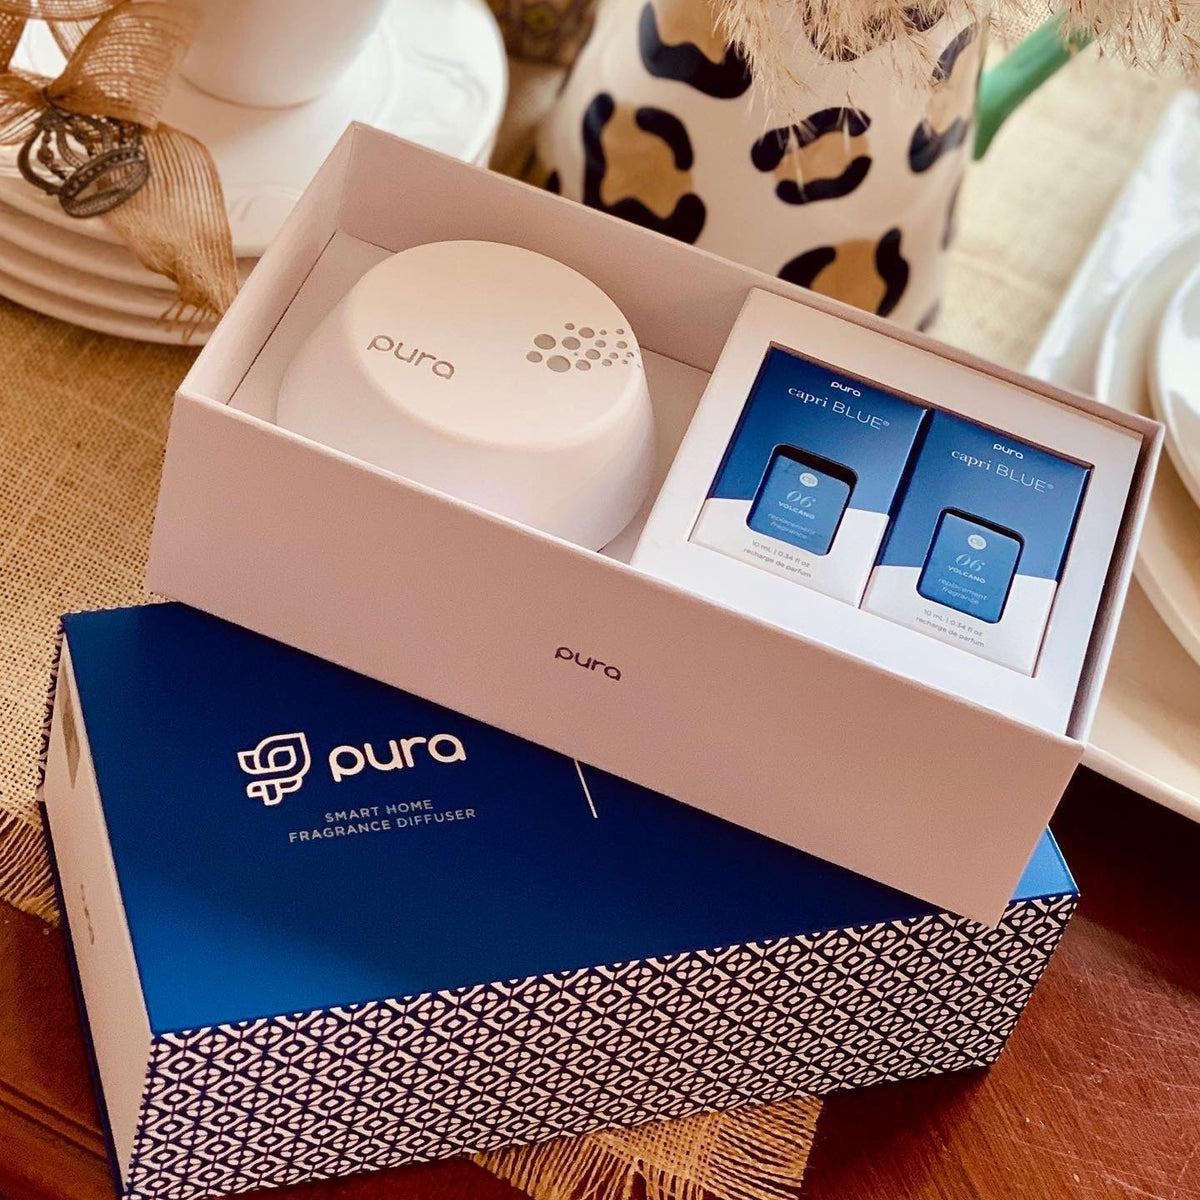 I Tried the Pura Smart Diffuser Plug-in and Now I Have Three